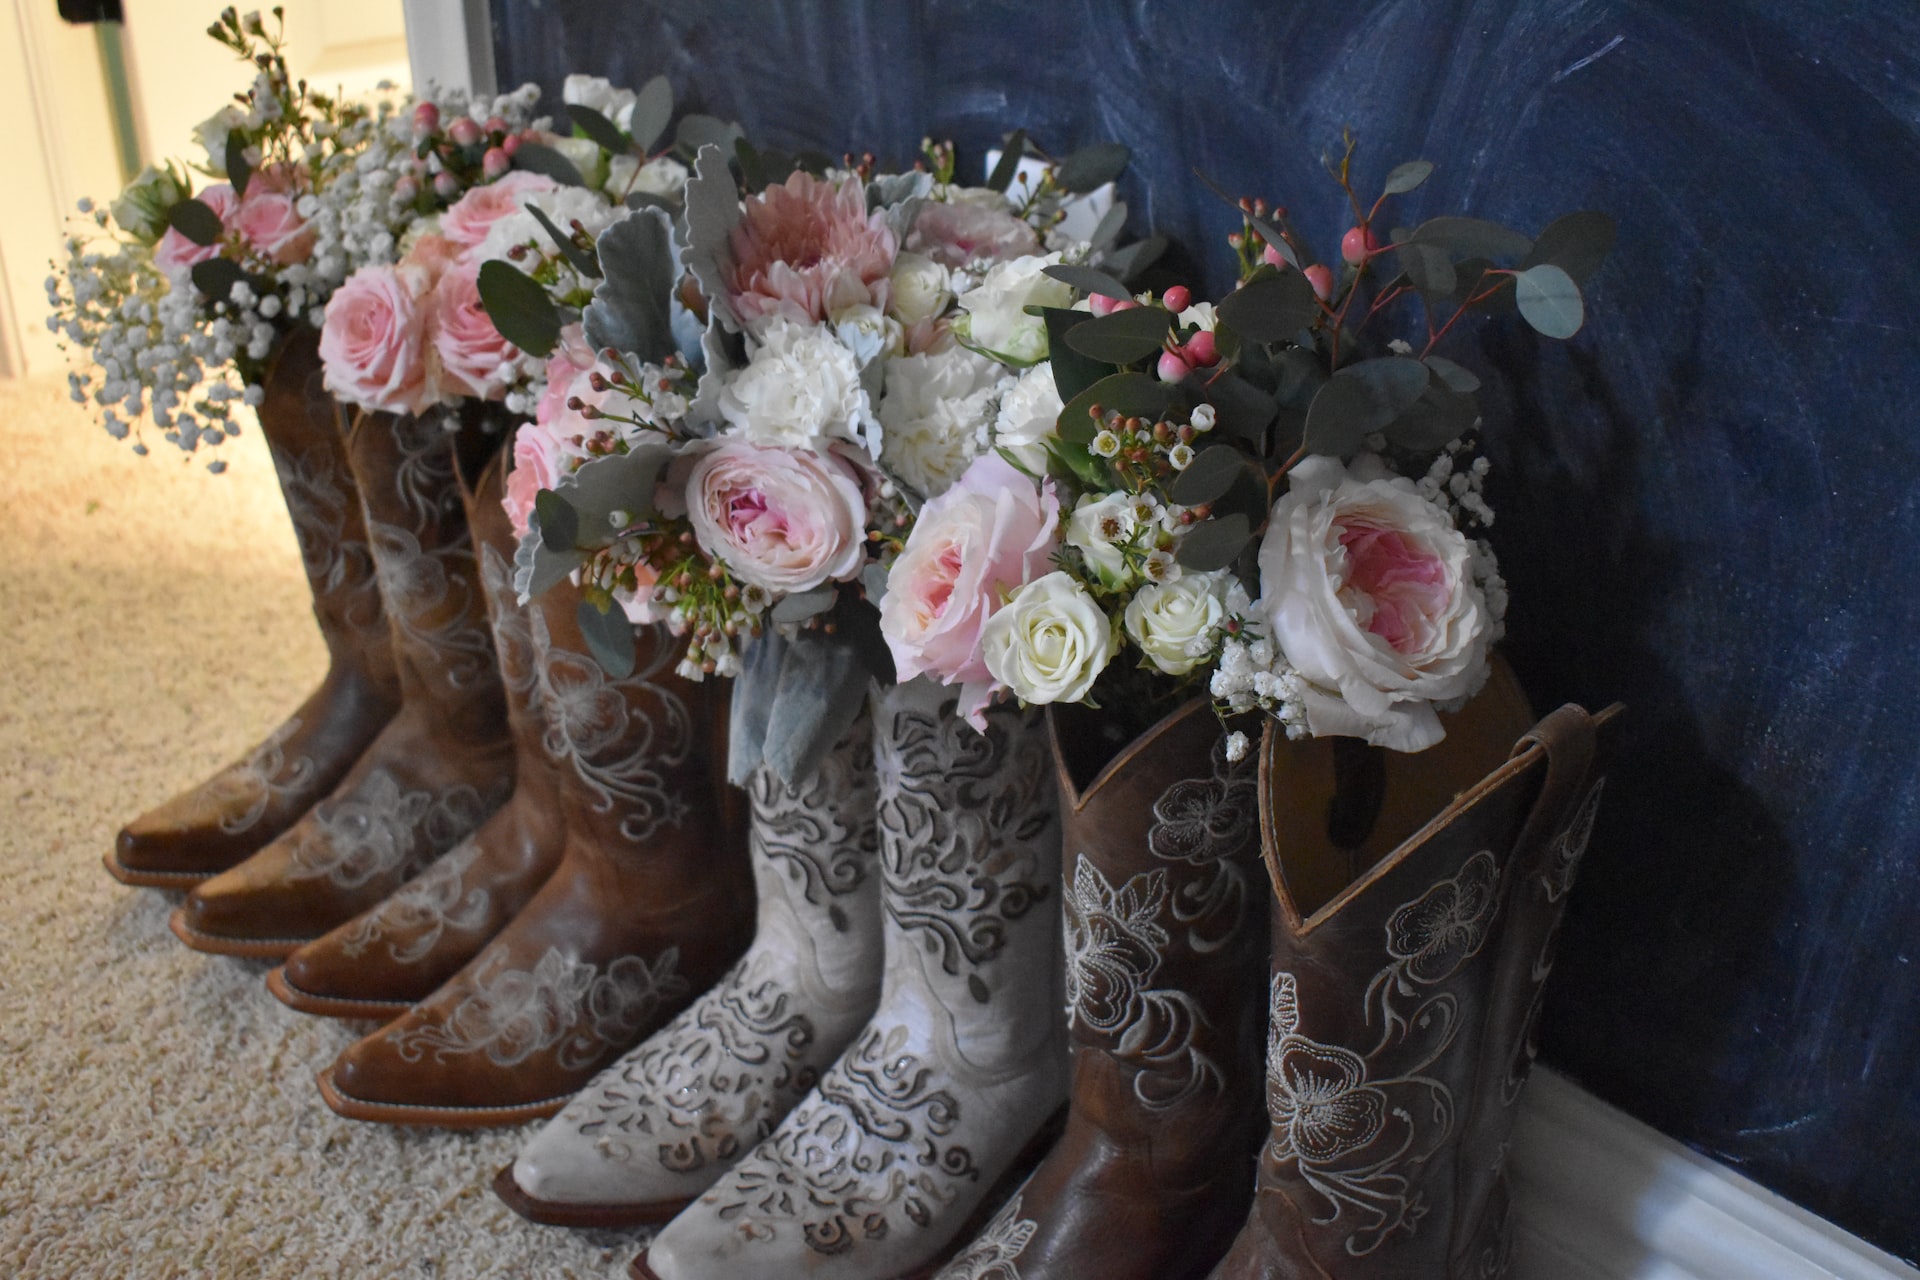 Flowers sticking out of cowboy boots